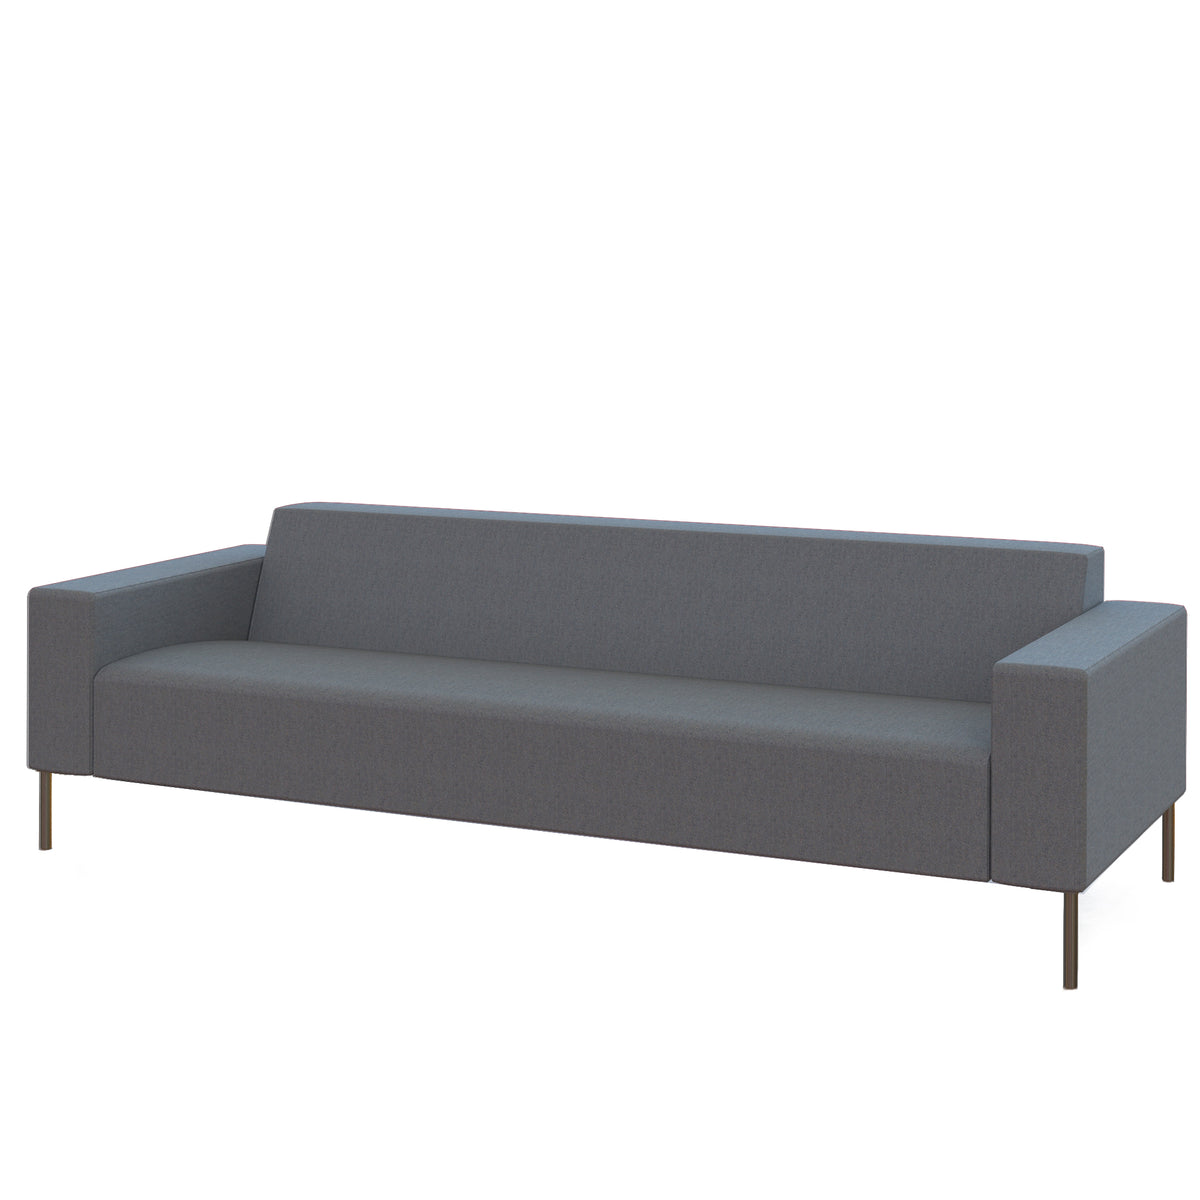 Hitch Mylius HM18 Origin Three Seat Sofa Brushed Stainless Steel Legs Westminster